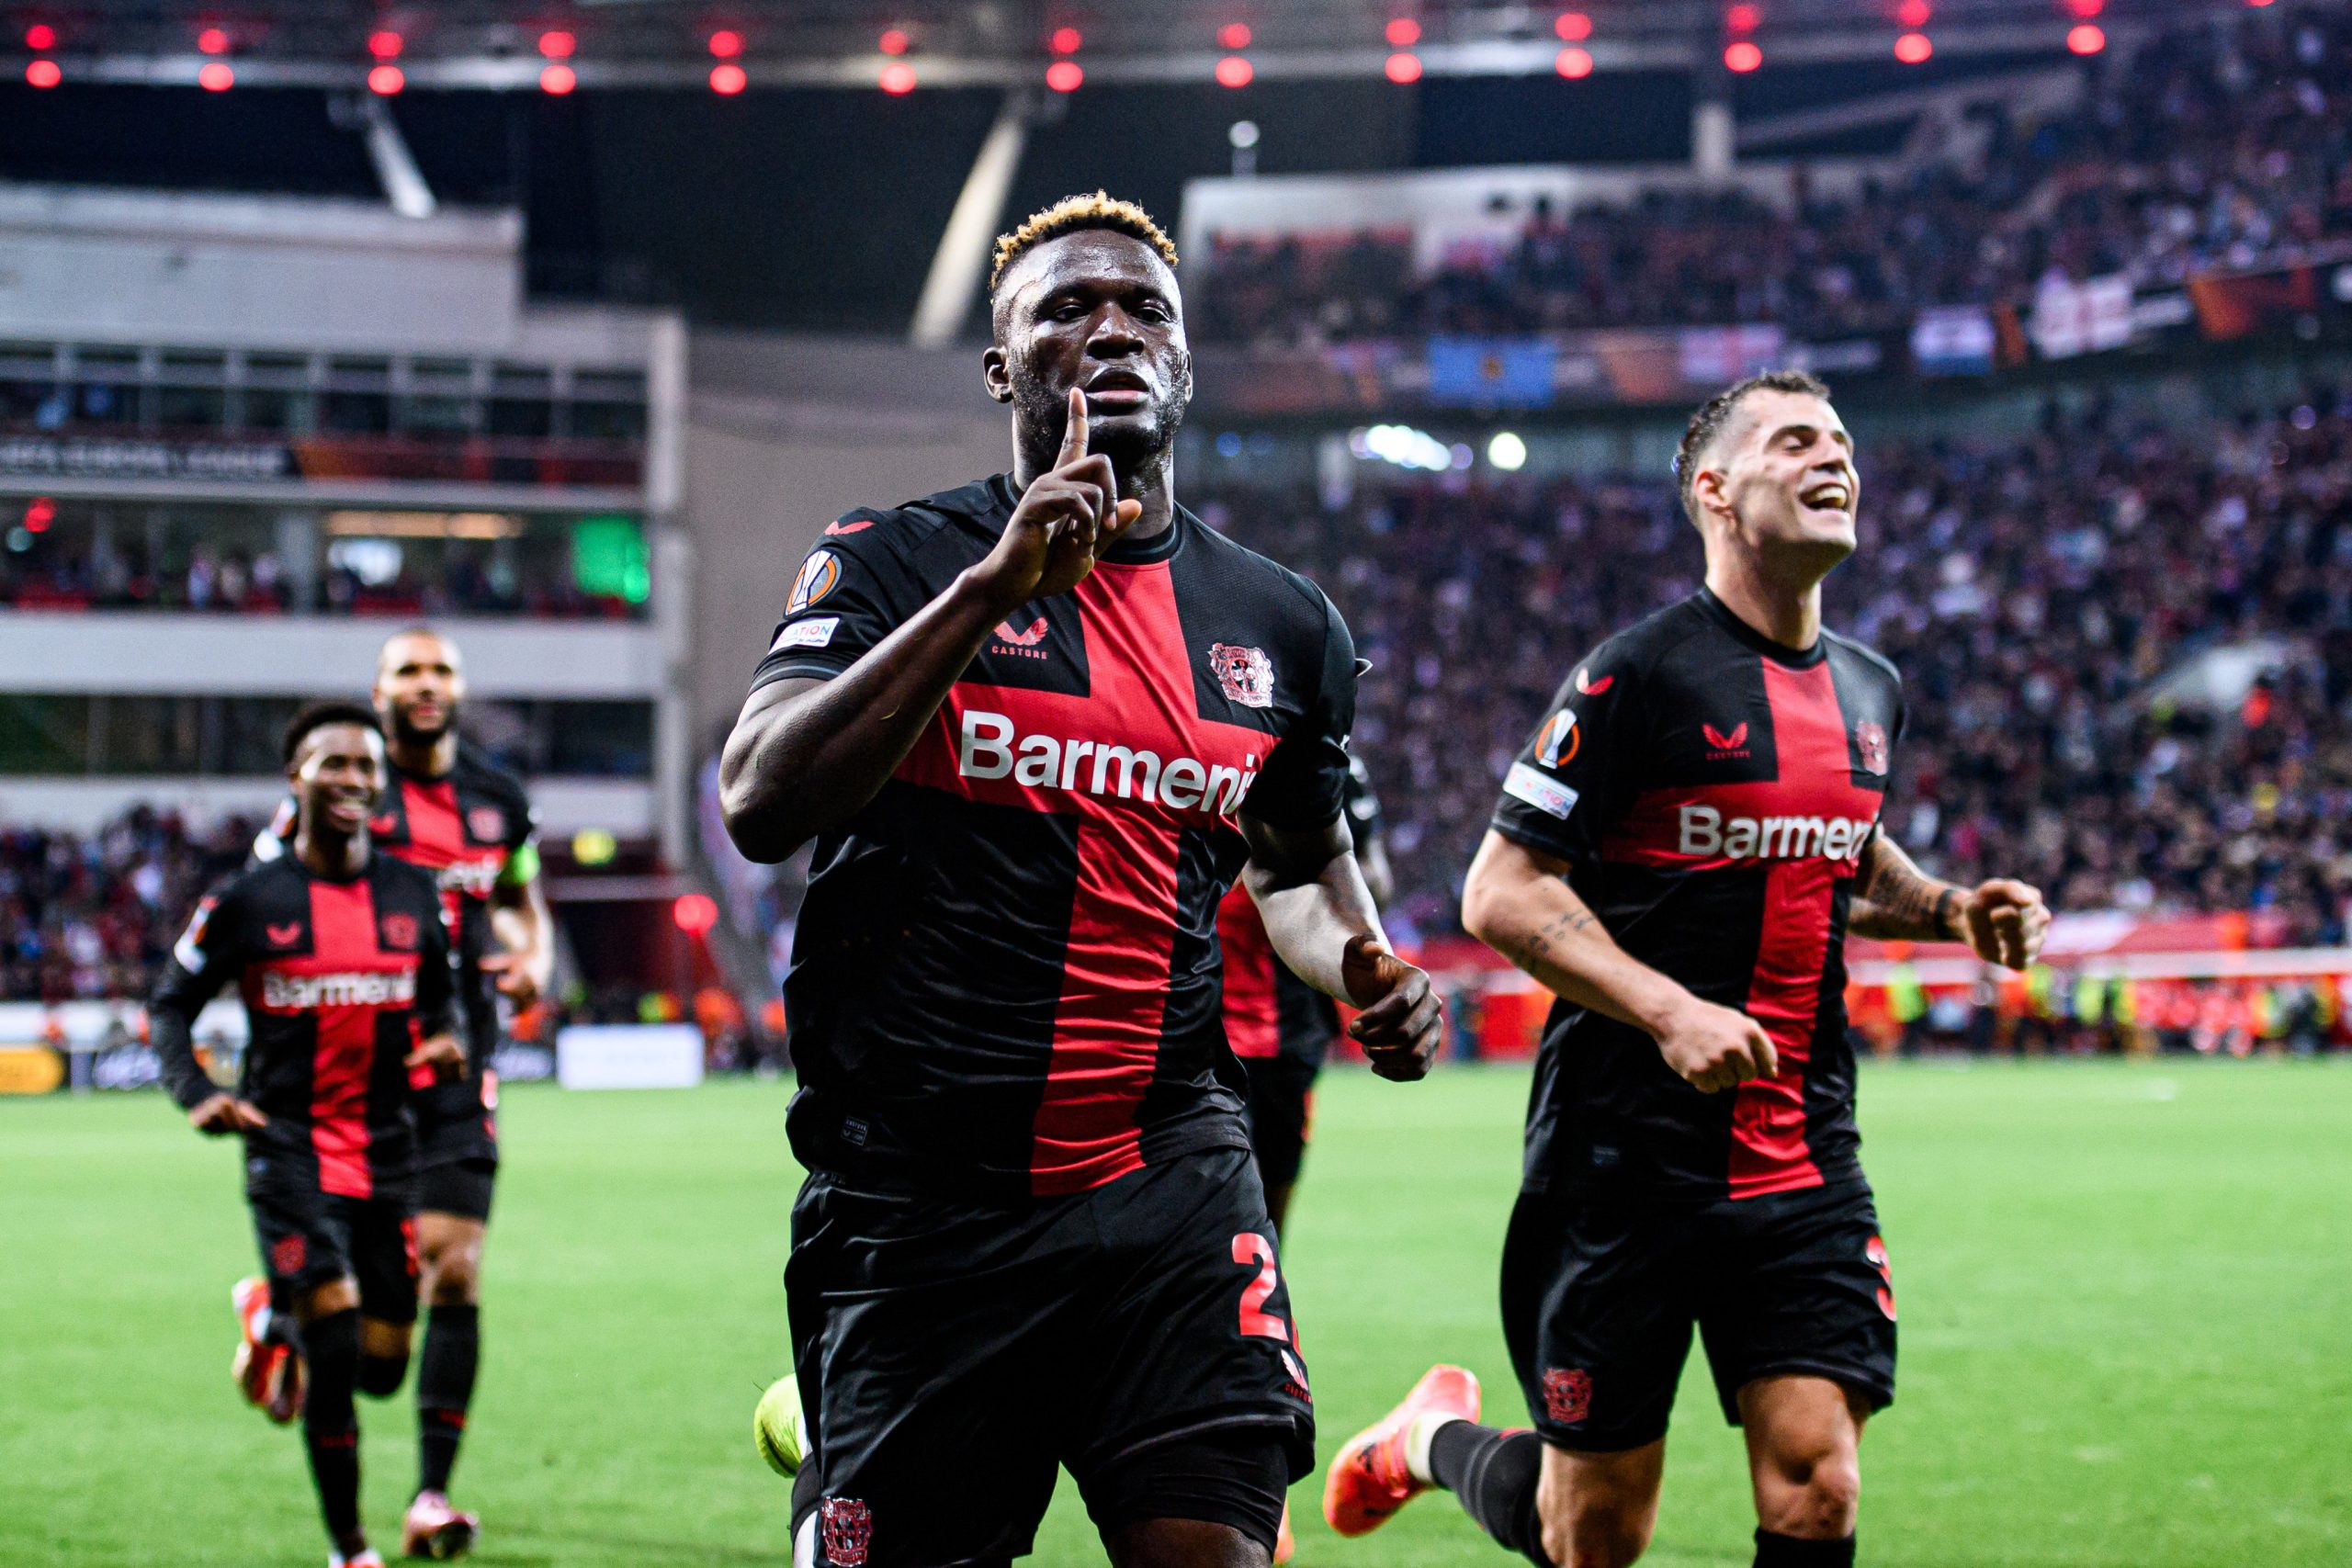 Victory party for Victor Boniface and Bayer Leverkusen today off